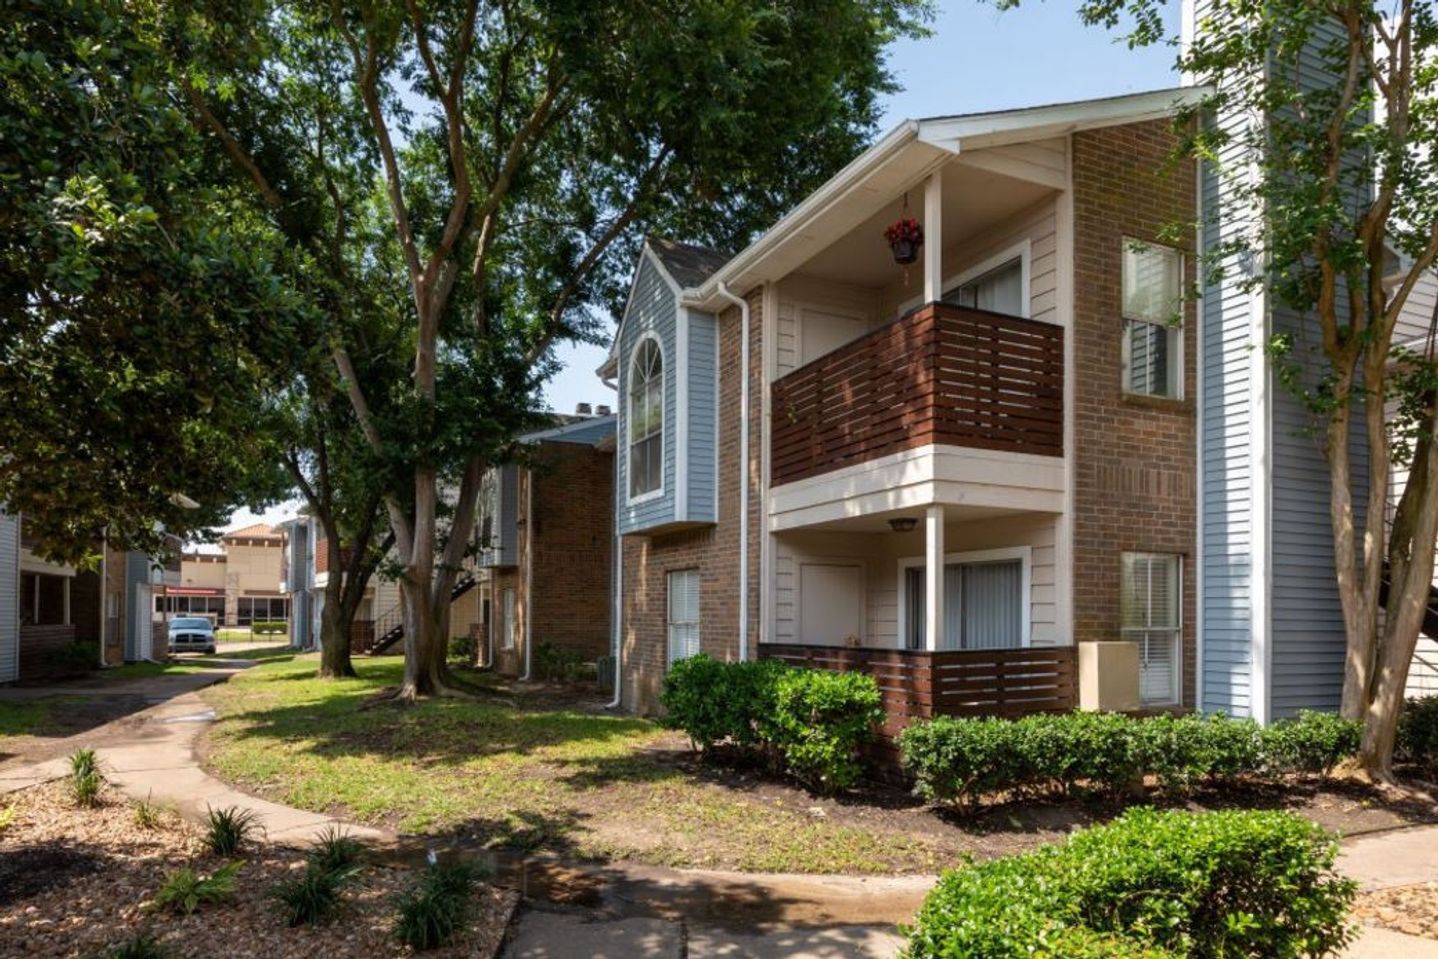 Sunrise Capital Led Investment Group Acquires 316-Unit The Gallery at Katy Apartment Community in Popular Houston Submarket